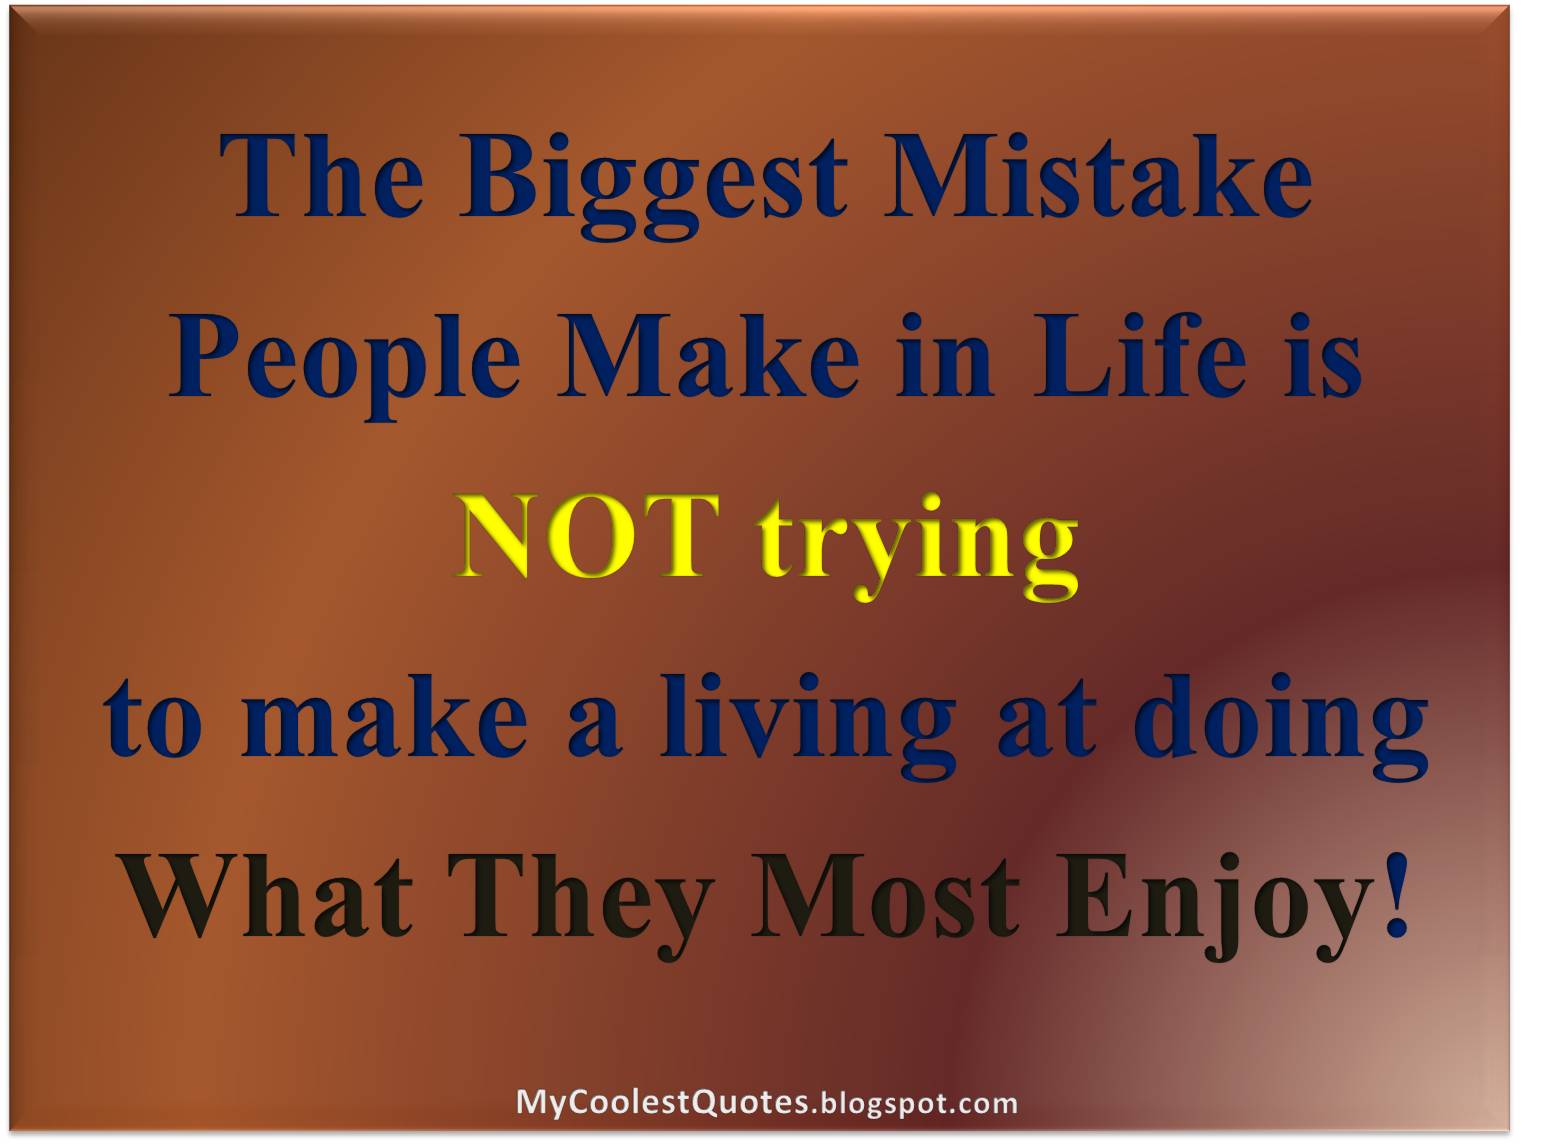 My Coolest Quotes Biggest Mistake People Make In Life